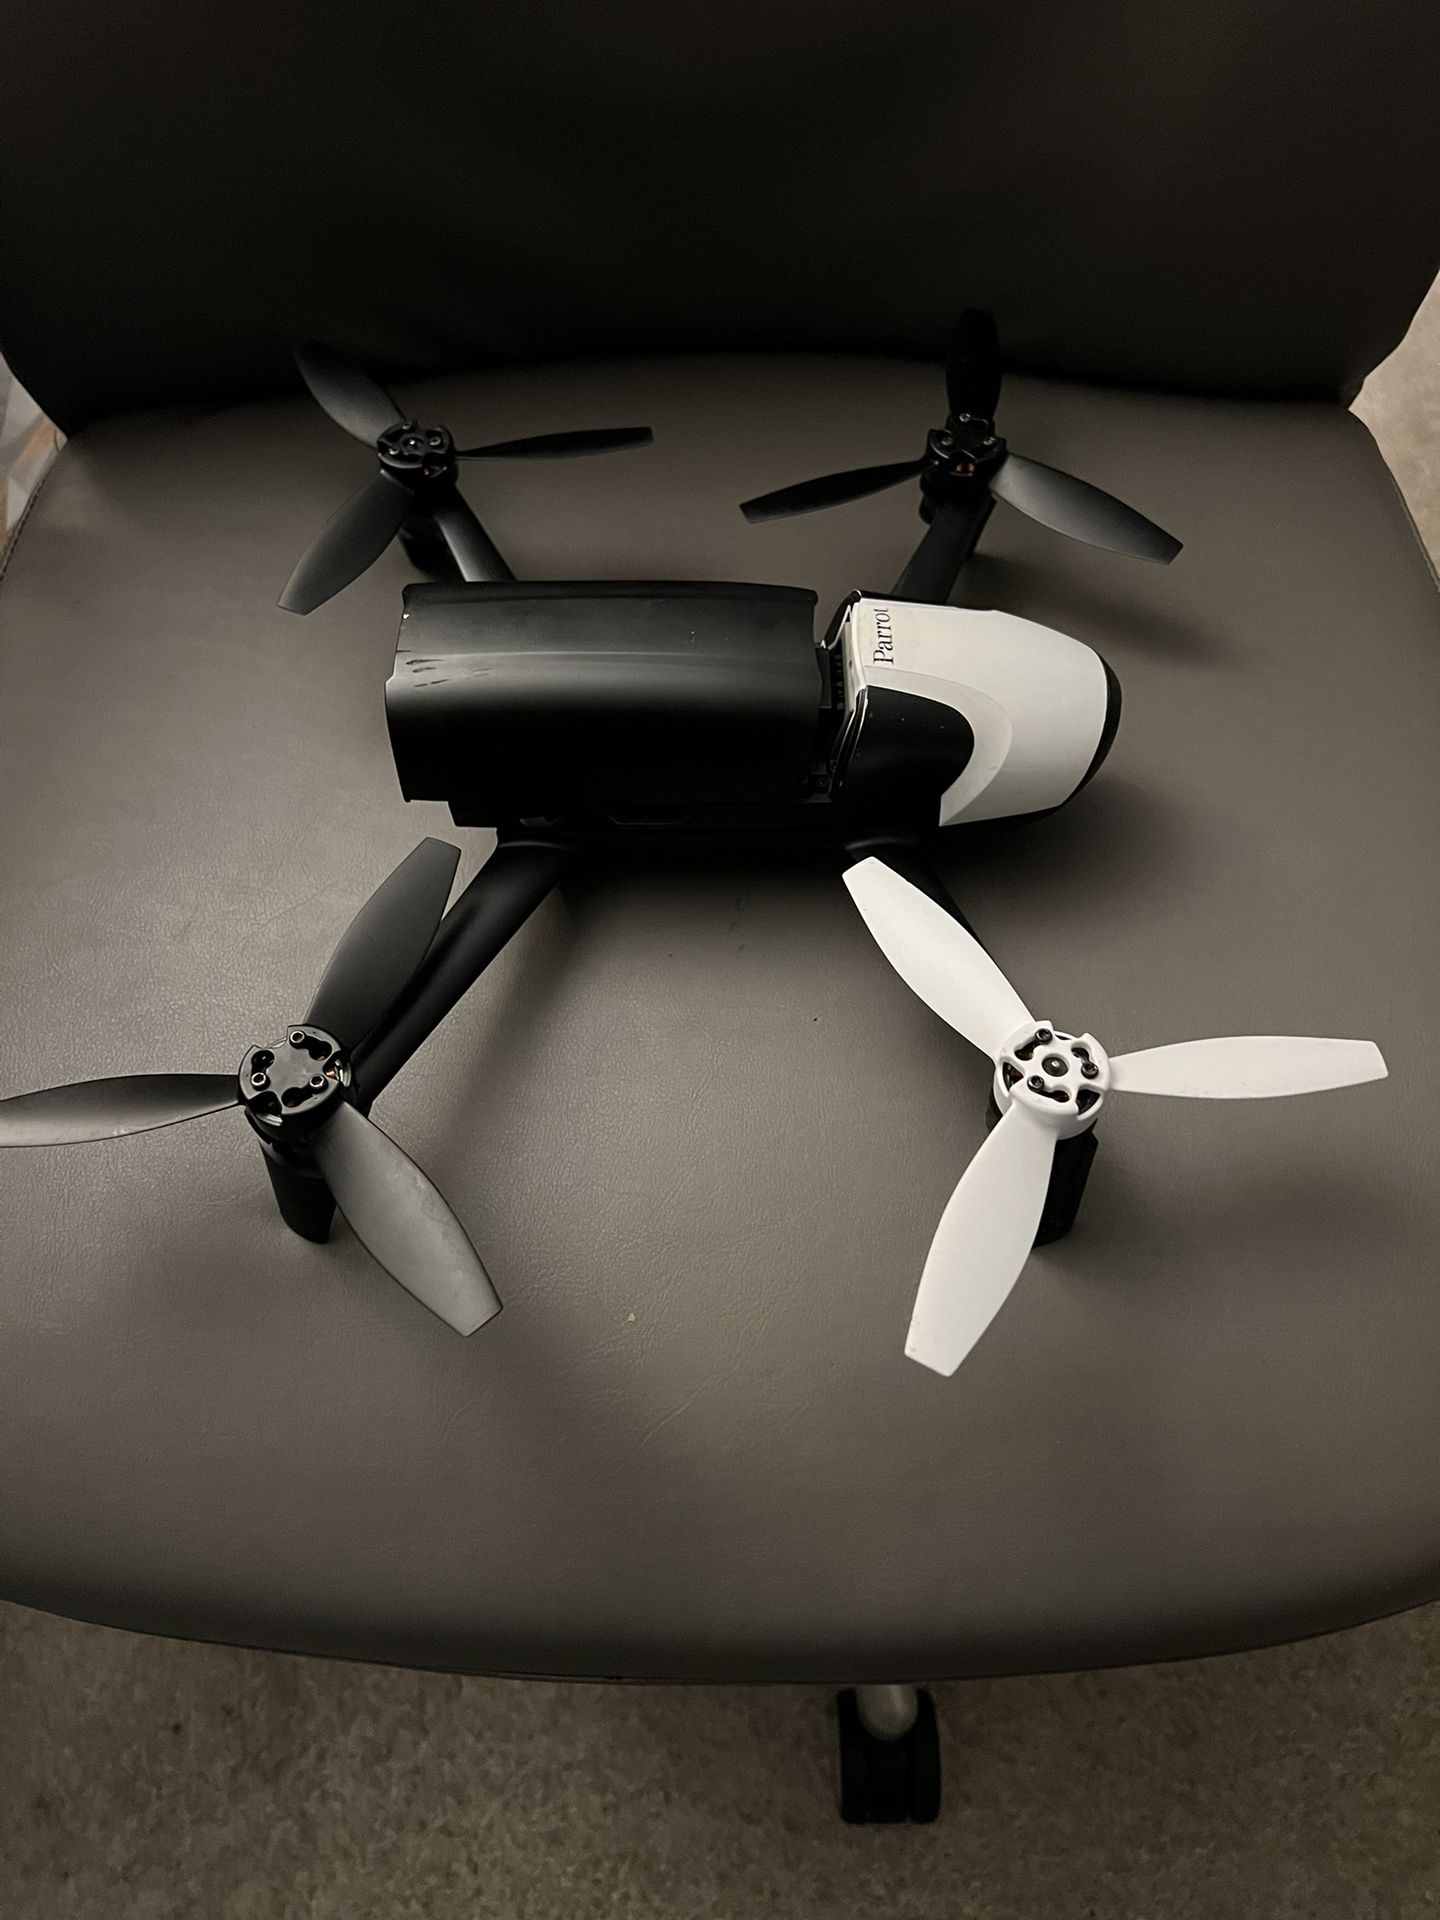 “Like-New Parrot Bebop 2 Drone: Upgrade Your Aerial Photography Today!”